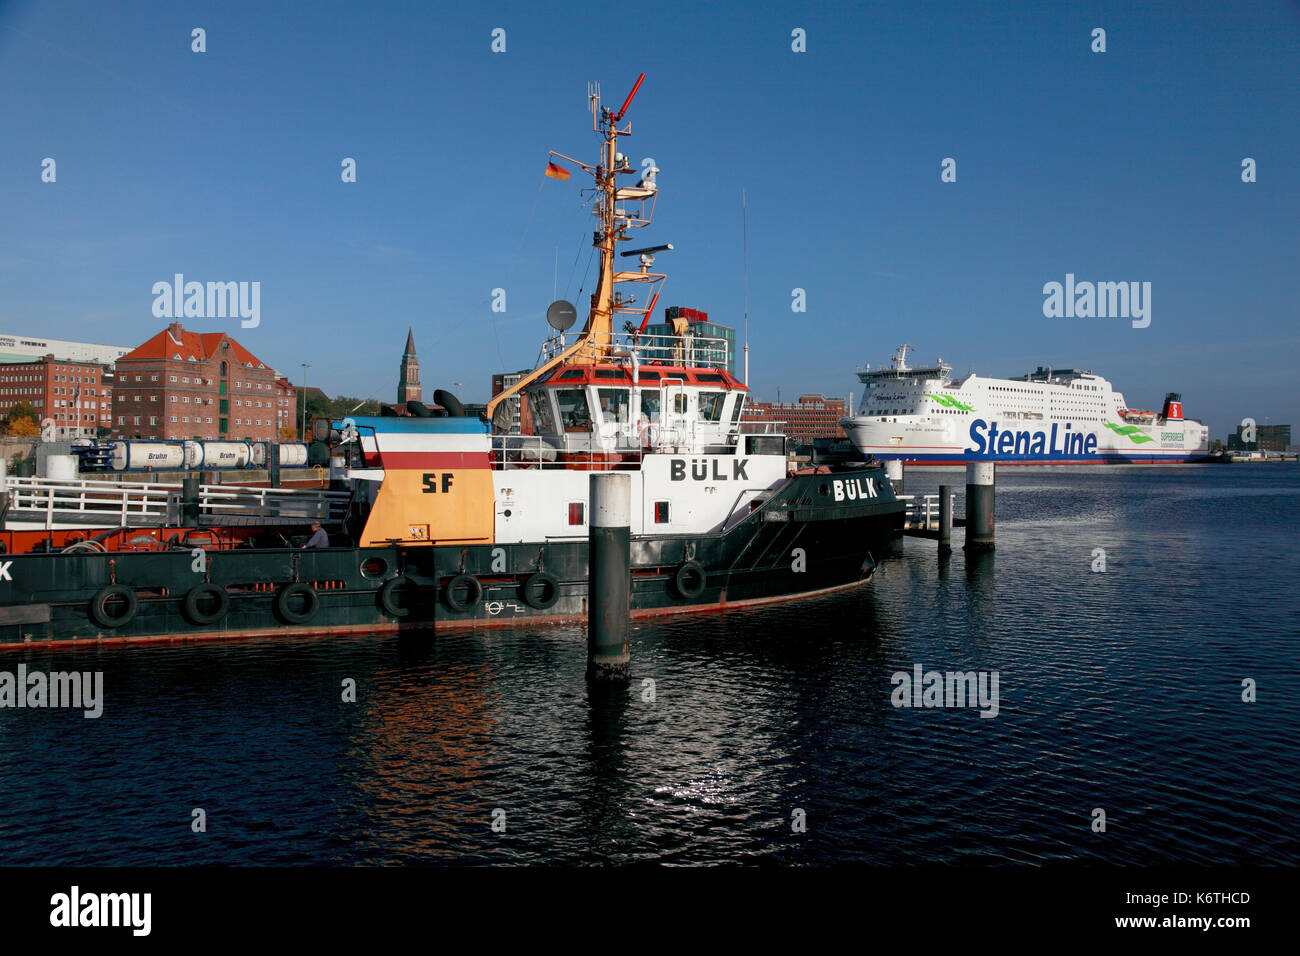 The tug boat, Bülk, moored in the port of Kiel with the Stena Line ferry Stena Germanica in the background. Stock Photo